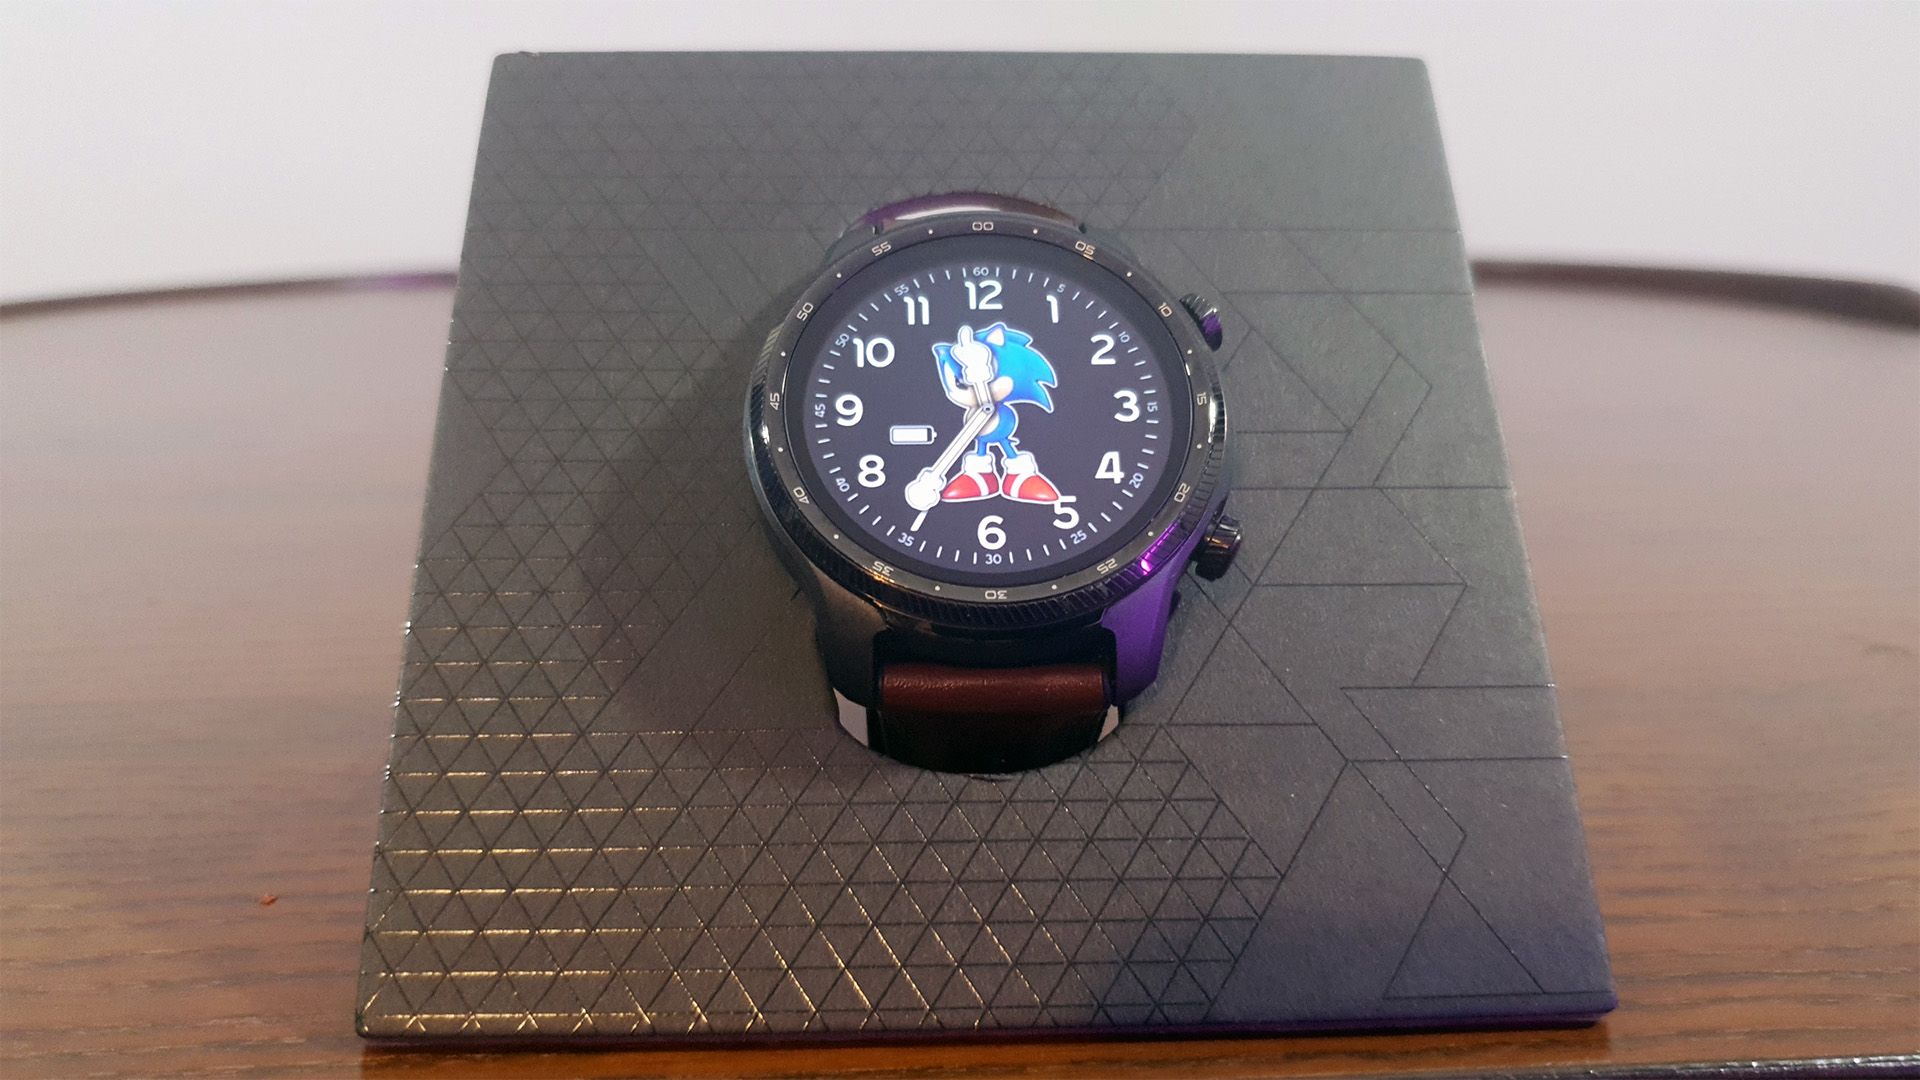 TicWatch Pro 3 Ultra GPS: A Great Smartwatch, Shame About WearOS